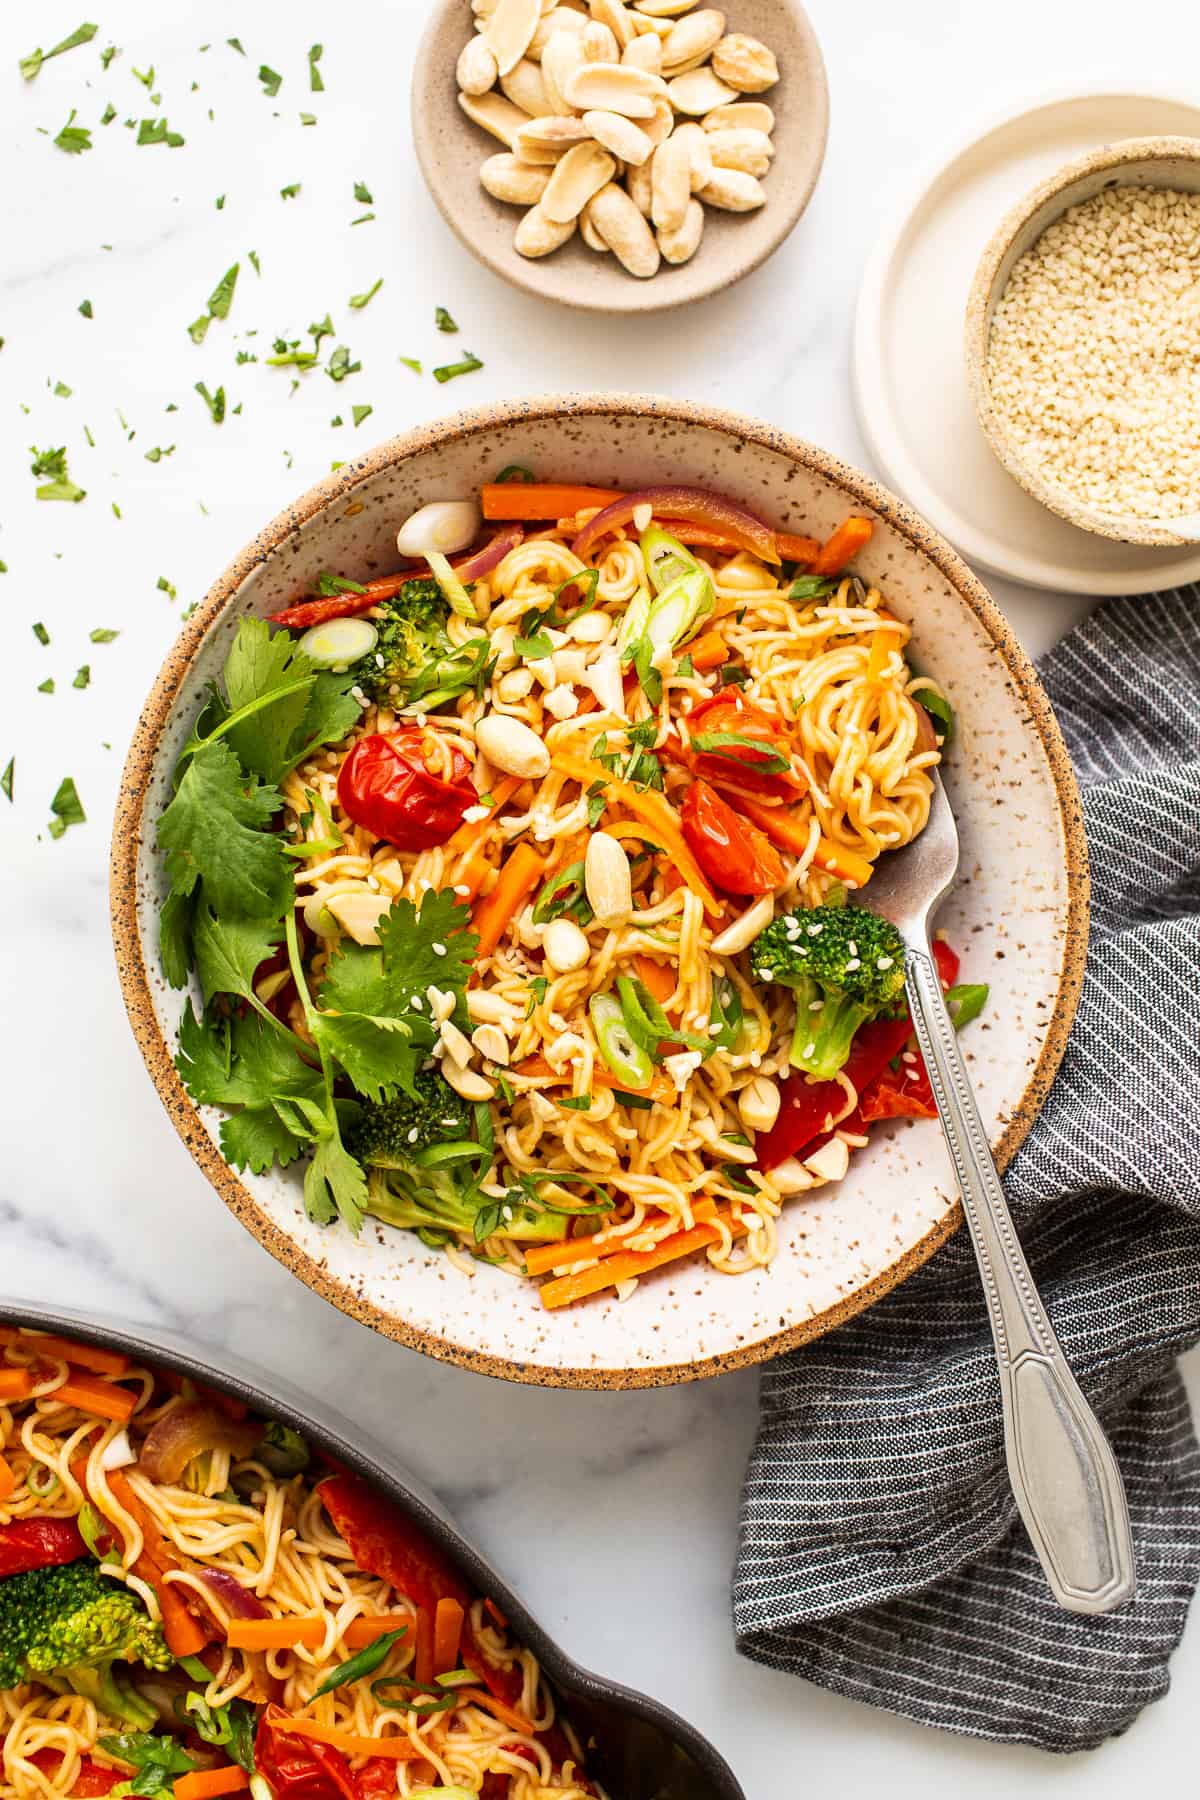 Peanut butter noodles with veggies in bowl.